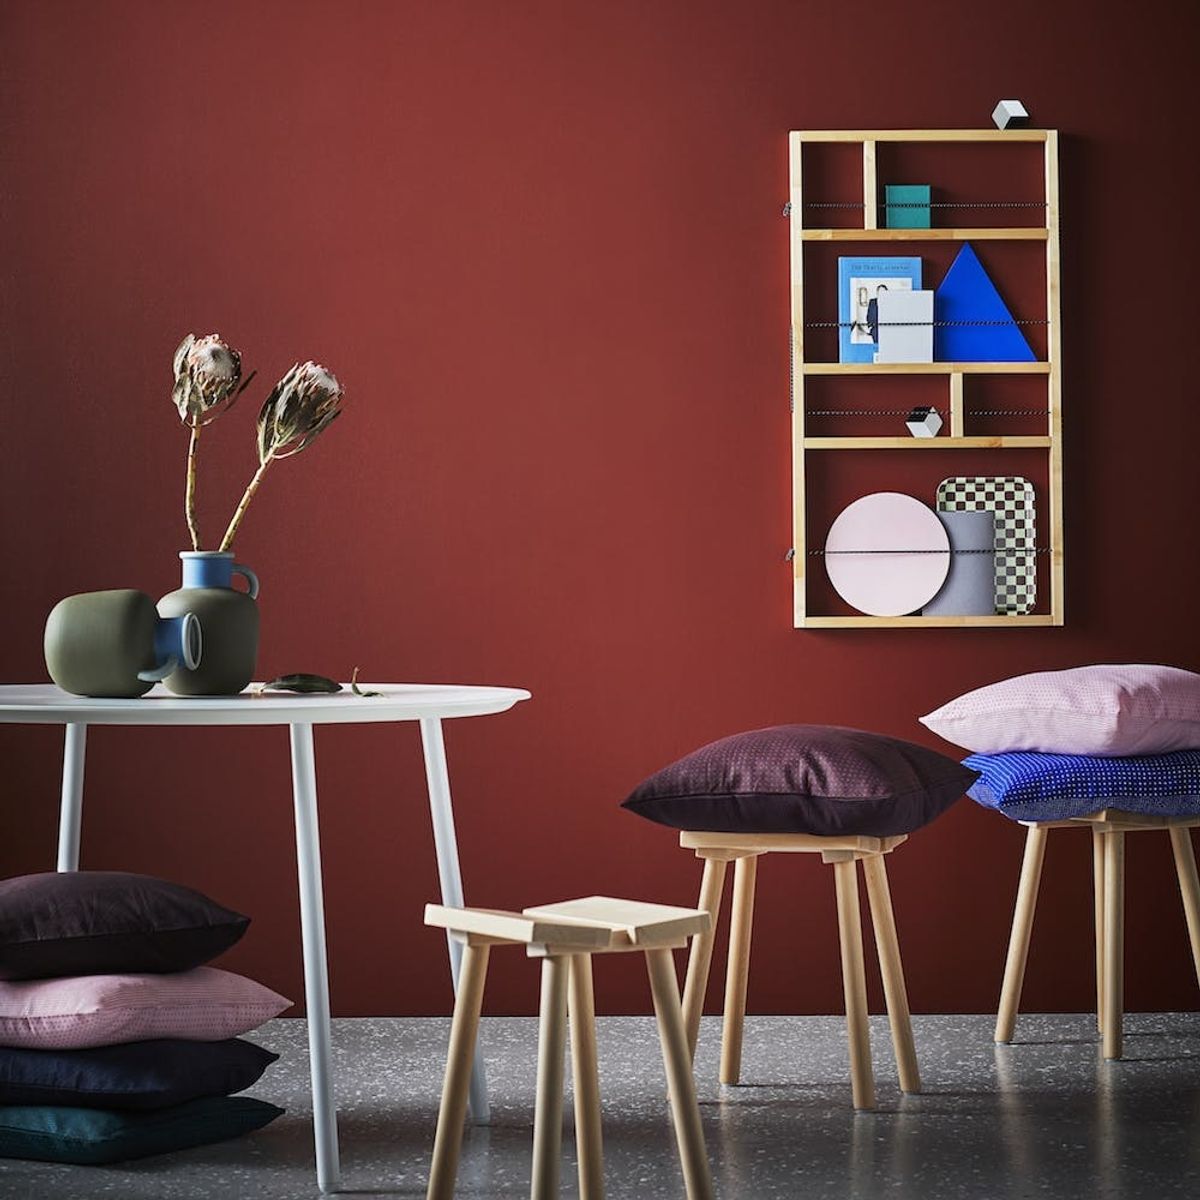 Everything You Need from IKEA’s New Mid-Century Modern Furniture Collection